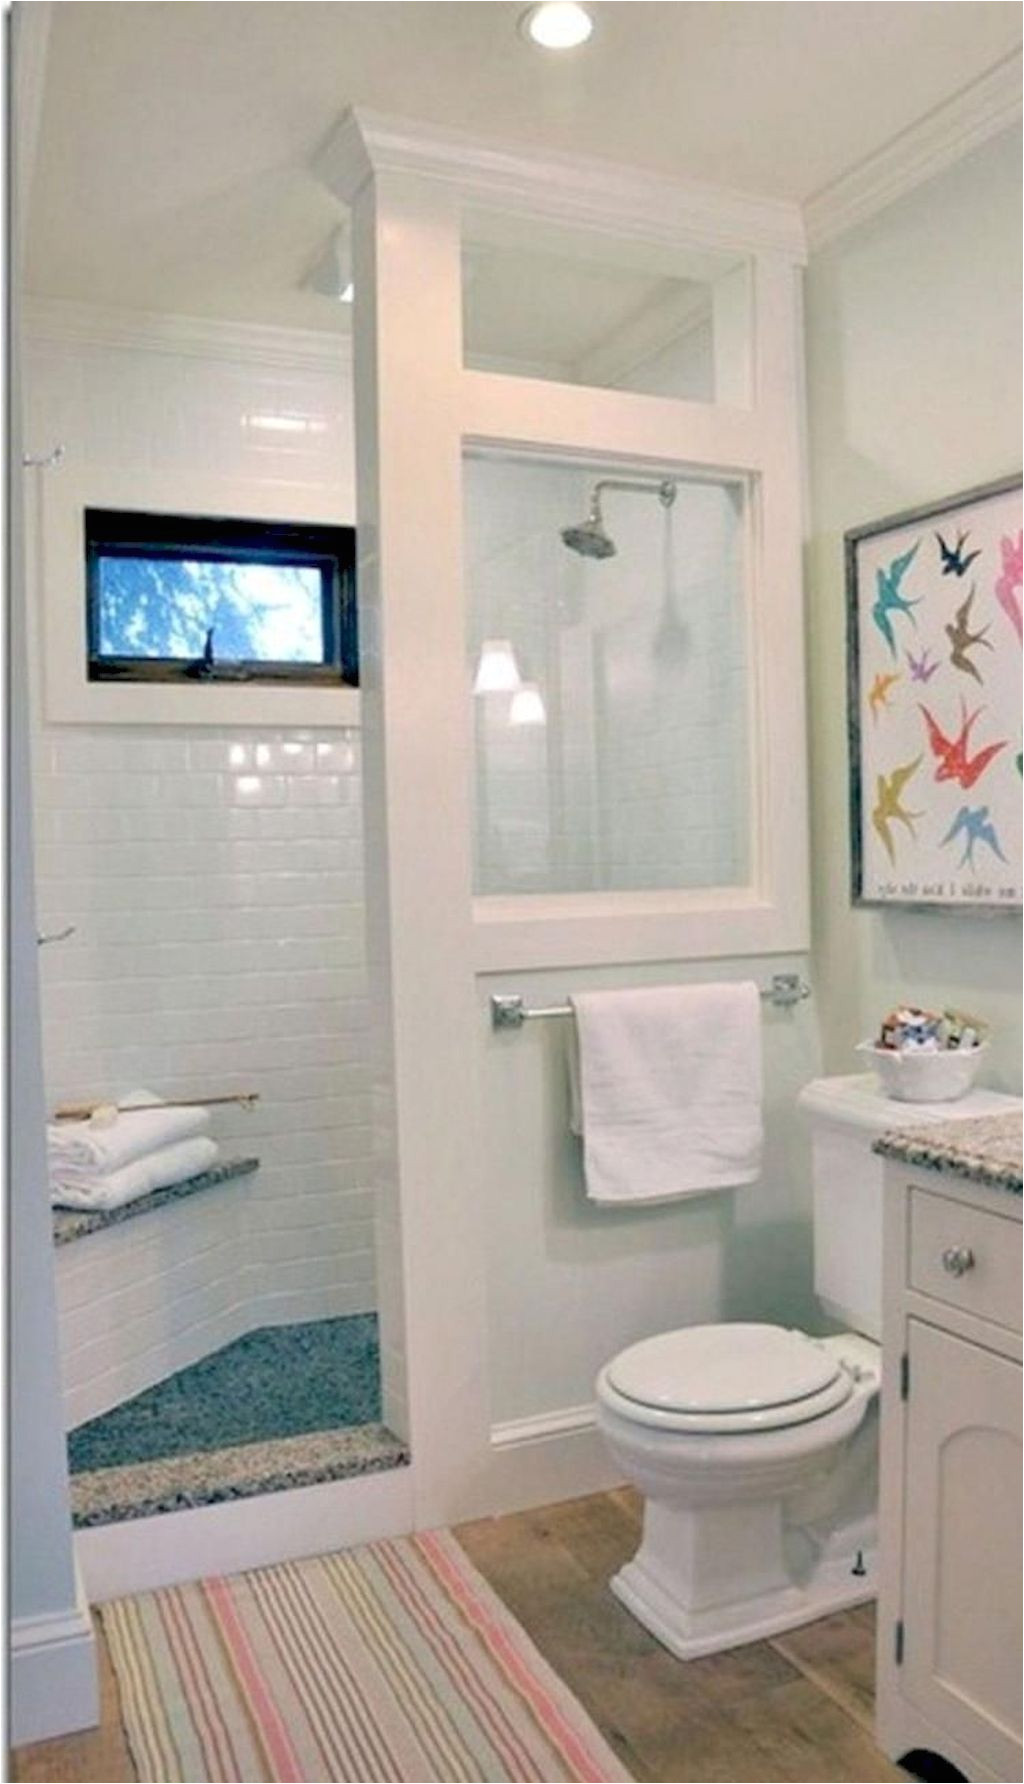 awesome 80 beautiful bathroom shower remodel ideas source link https moodecor